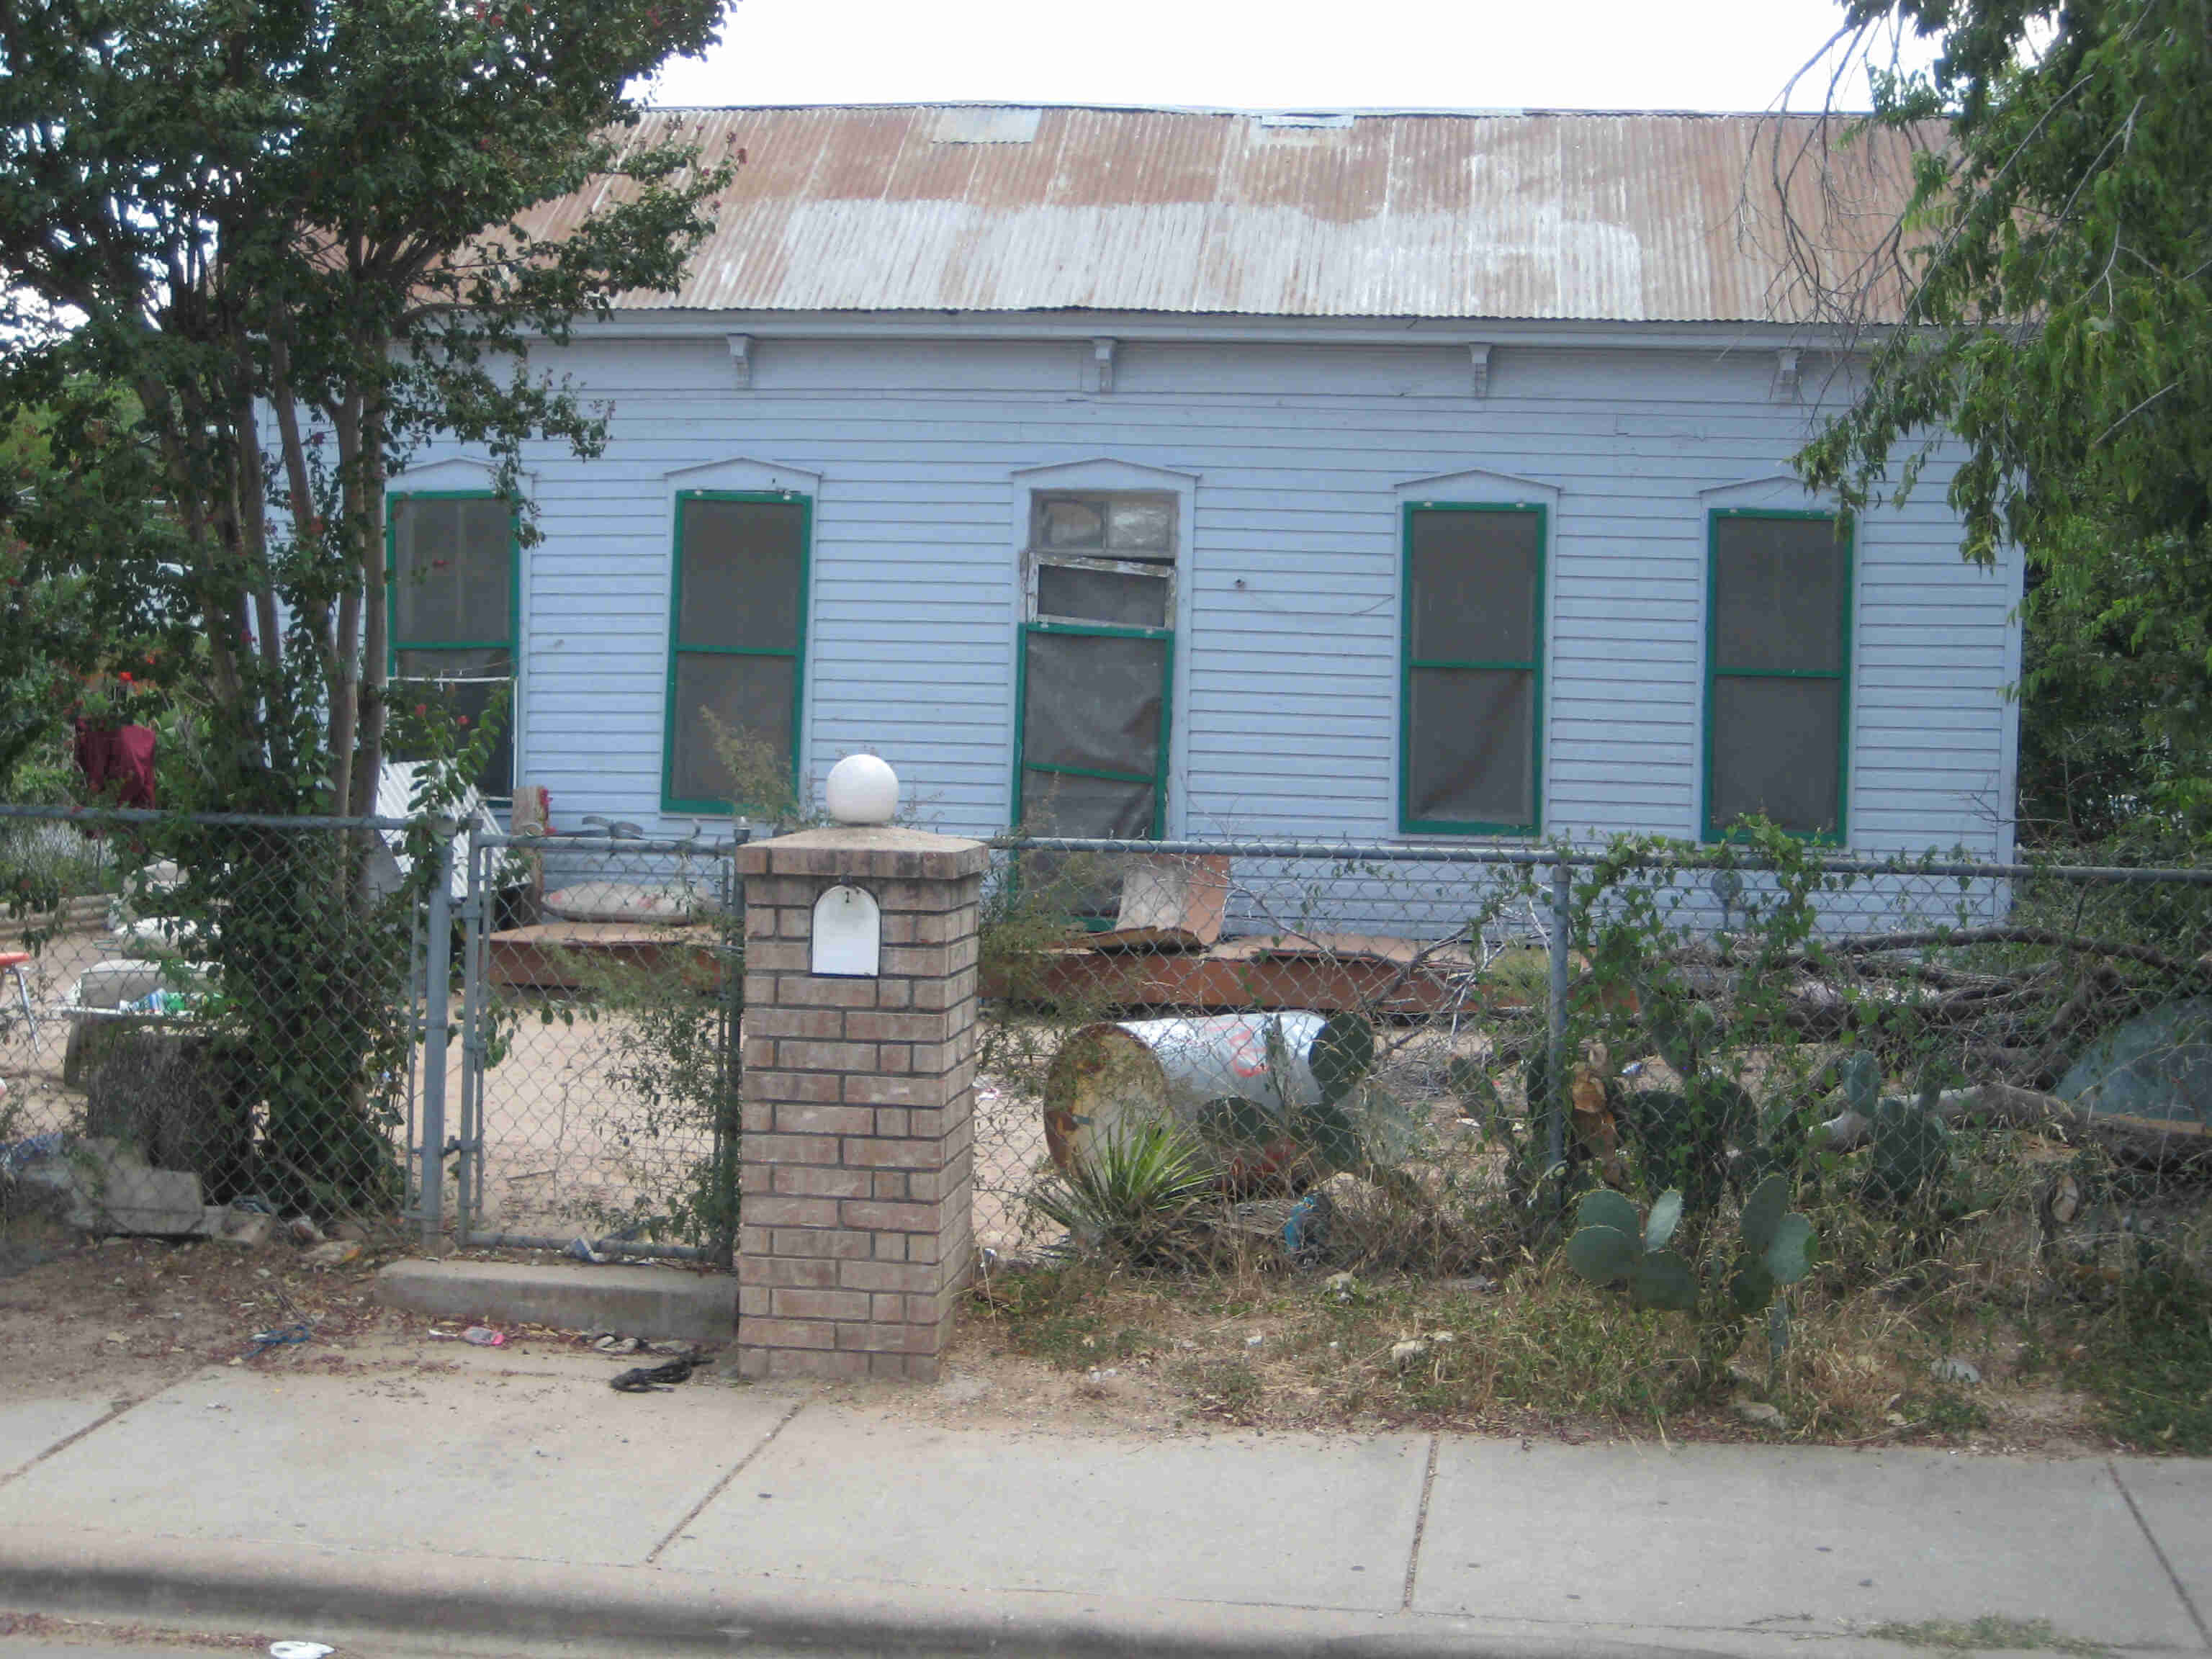 Front, street view of a house with a rusty steel roof and chain link fence around it, with junk laying around the yard